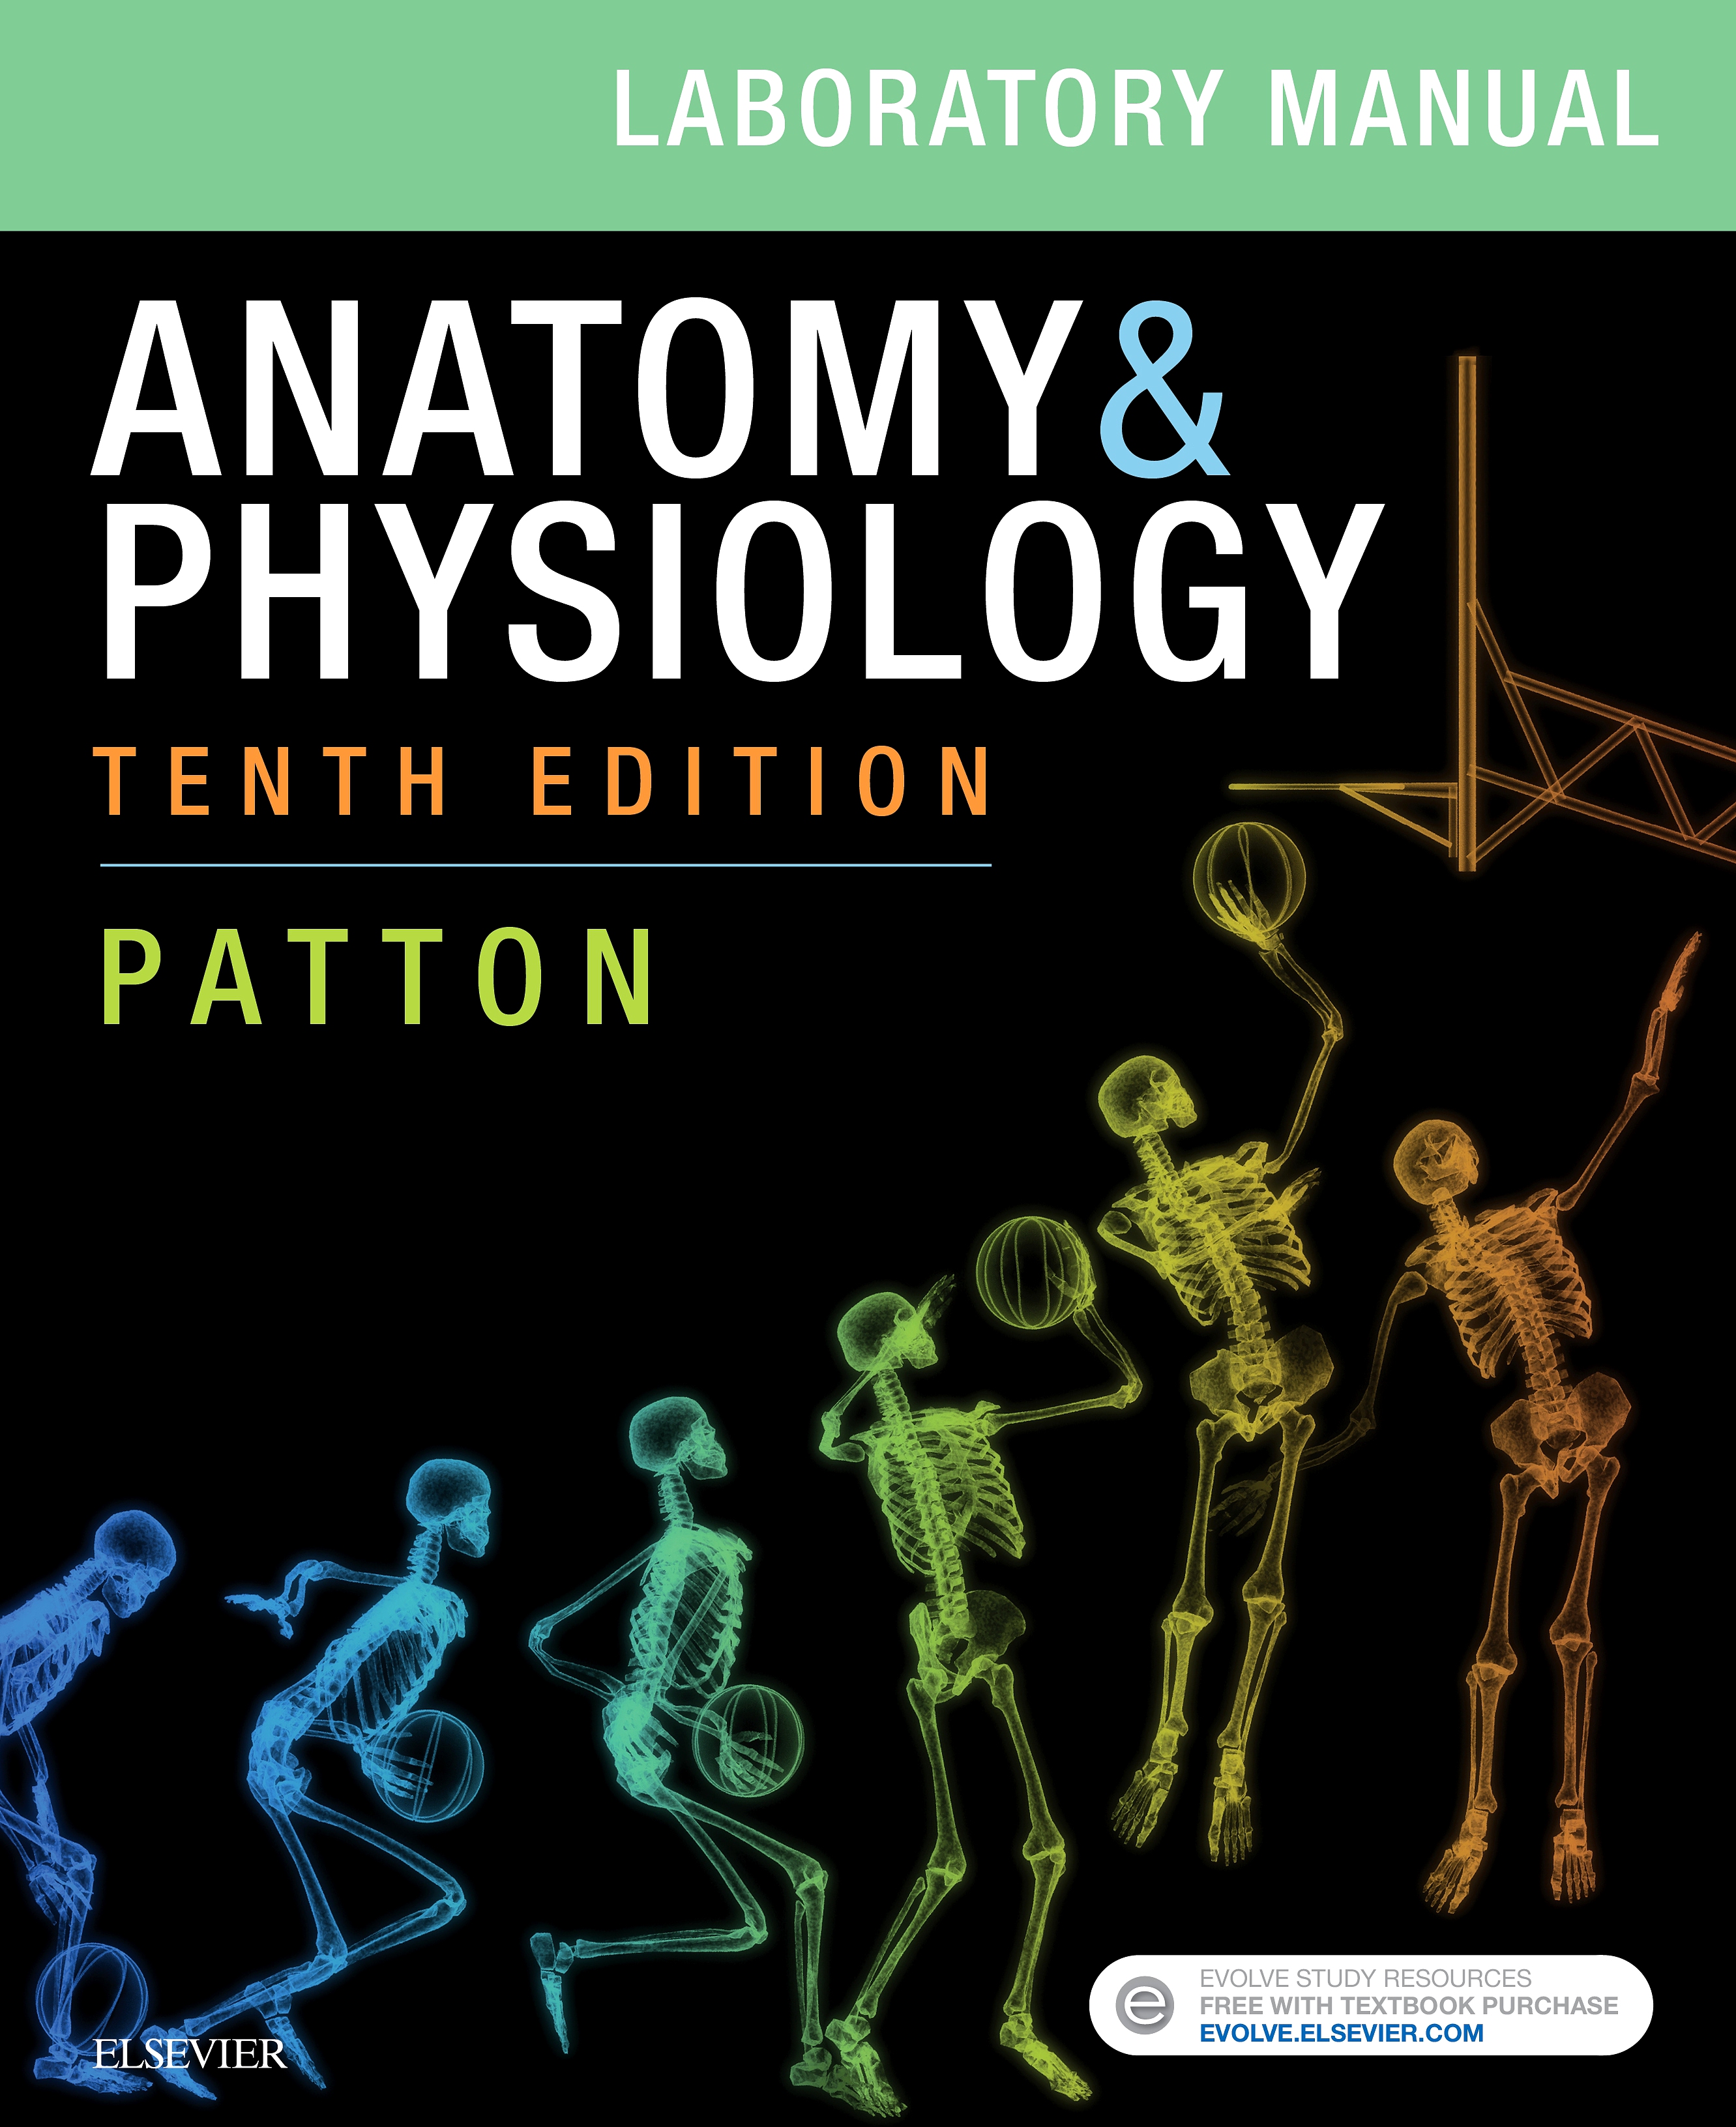 Evolve Resources for Anatomy & Physiology Laboratory Manual, 10th